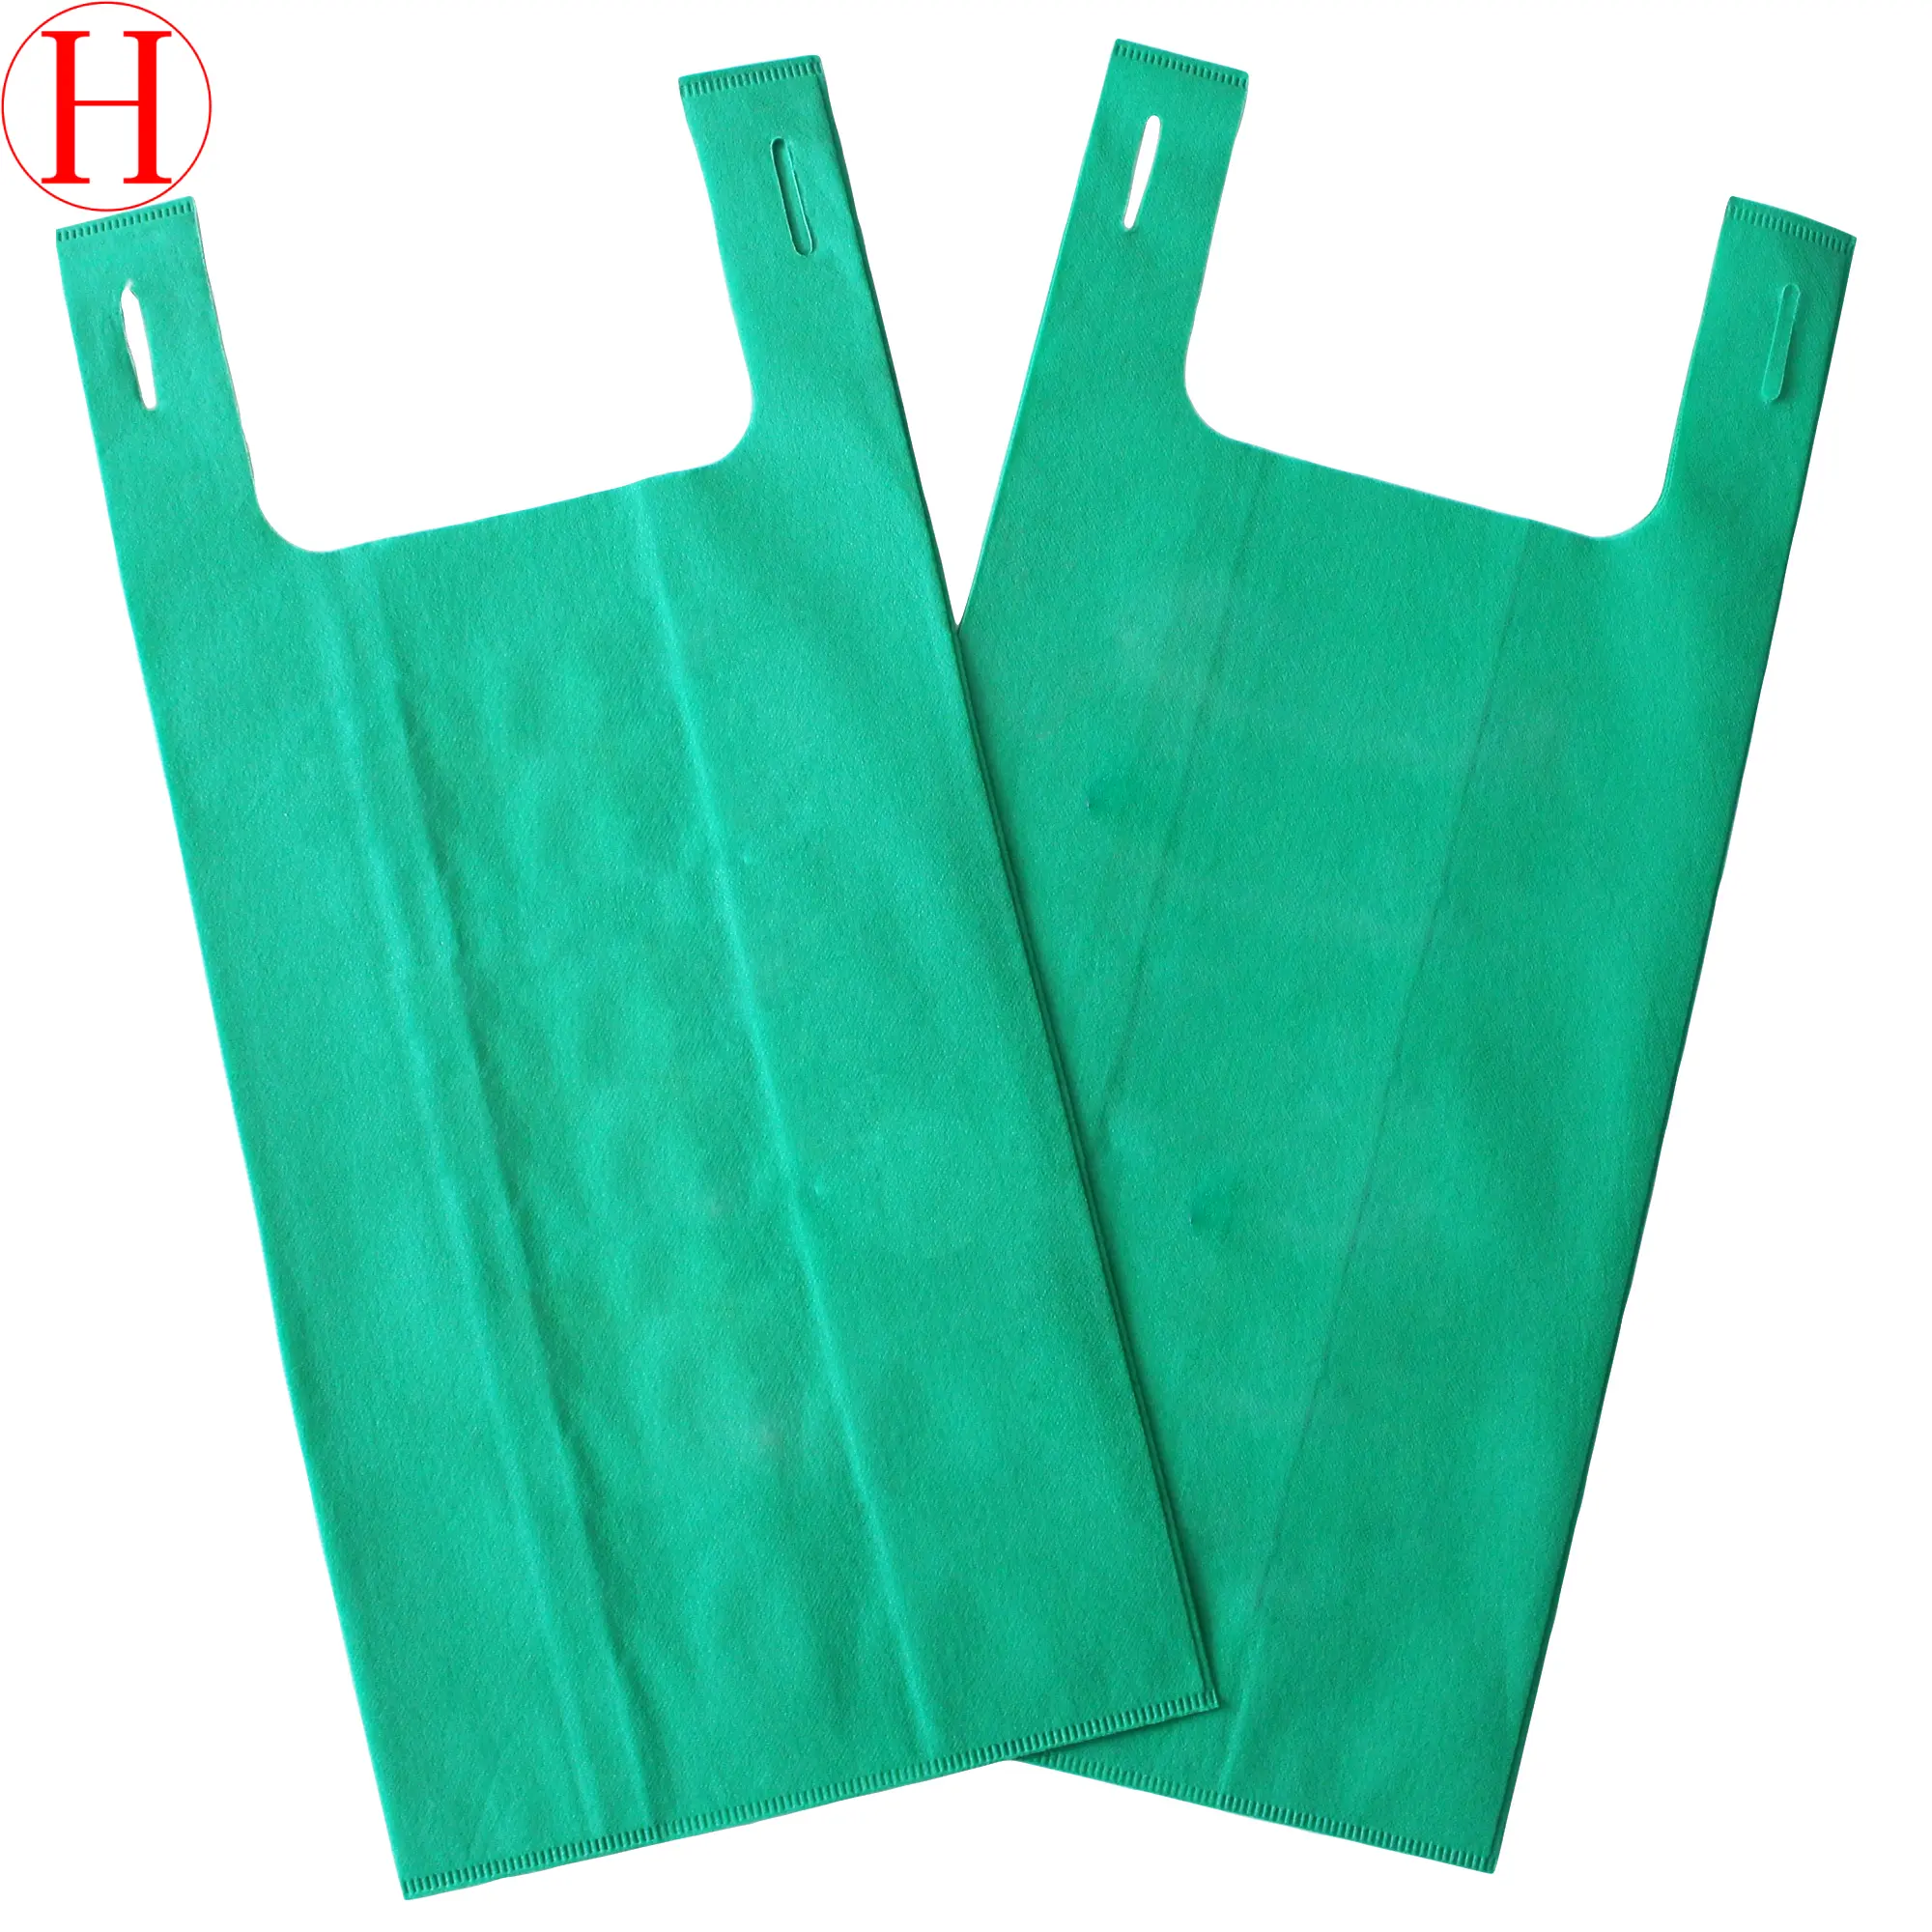 Fashion pp cheap customized eco-friendly reusable U cut nonwoven t shirt shopping bags for supermarkets stores and grocerys